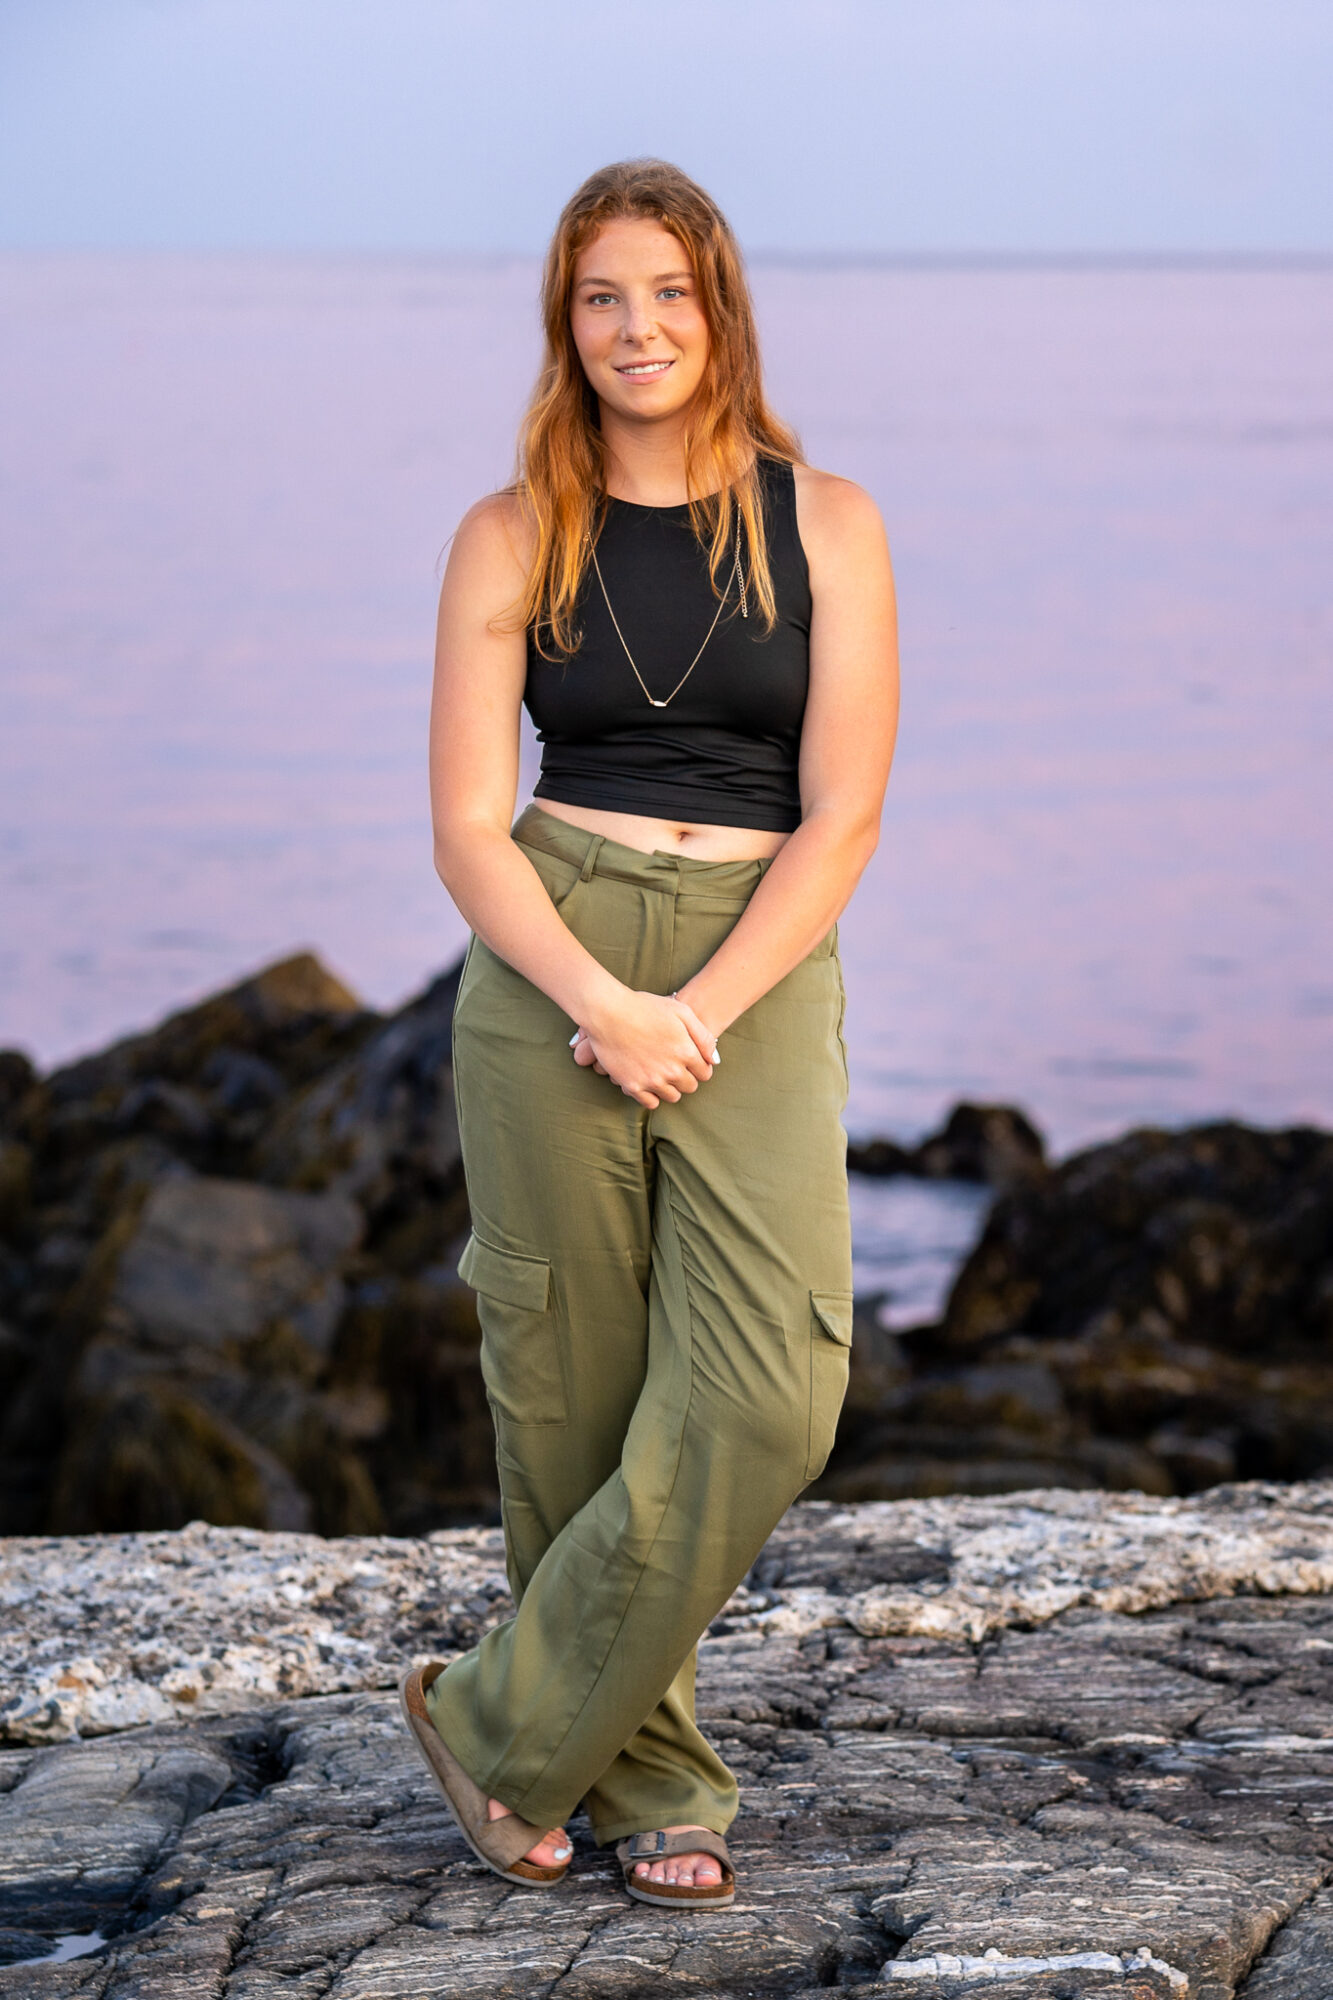 high school senior girl with auburn hair wearing black tank top and green cargo pants standing on rock at sunset